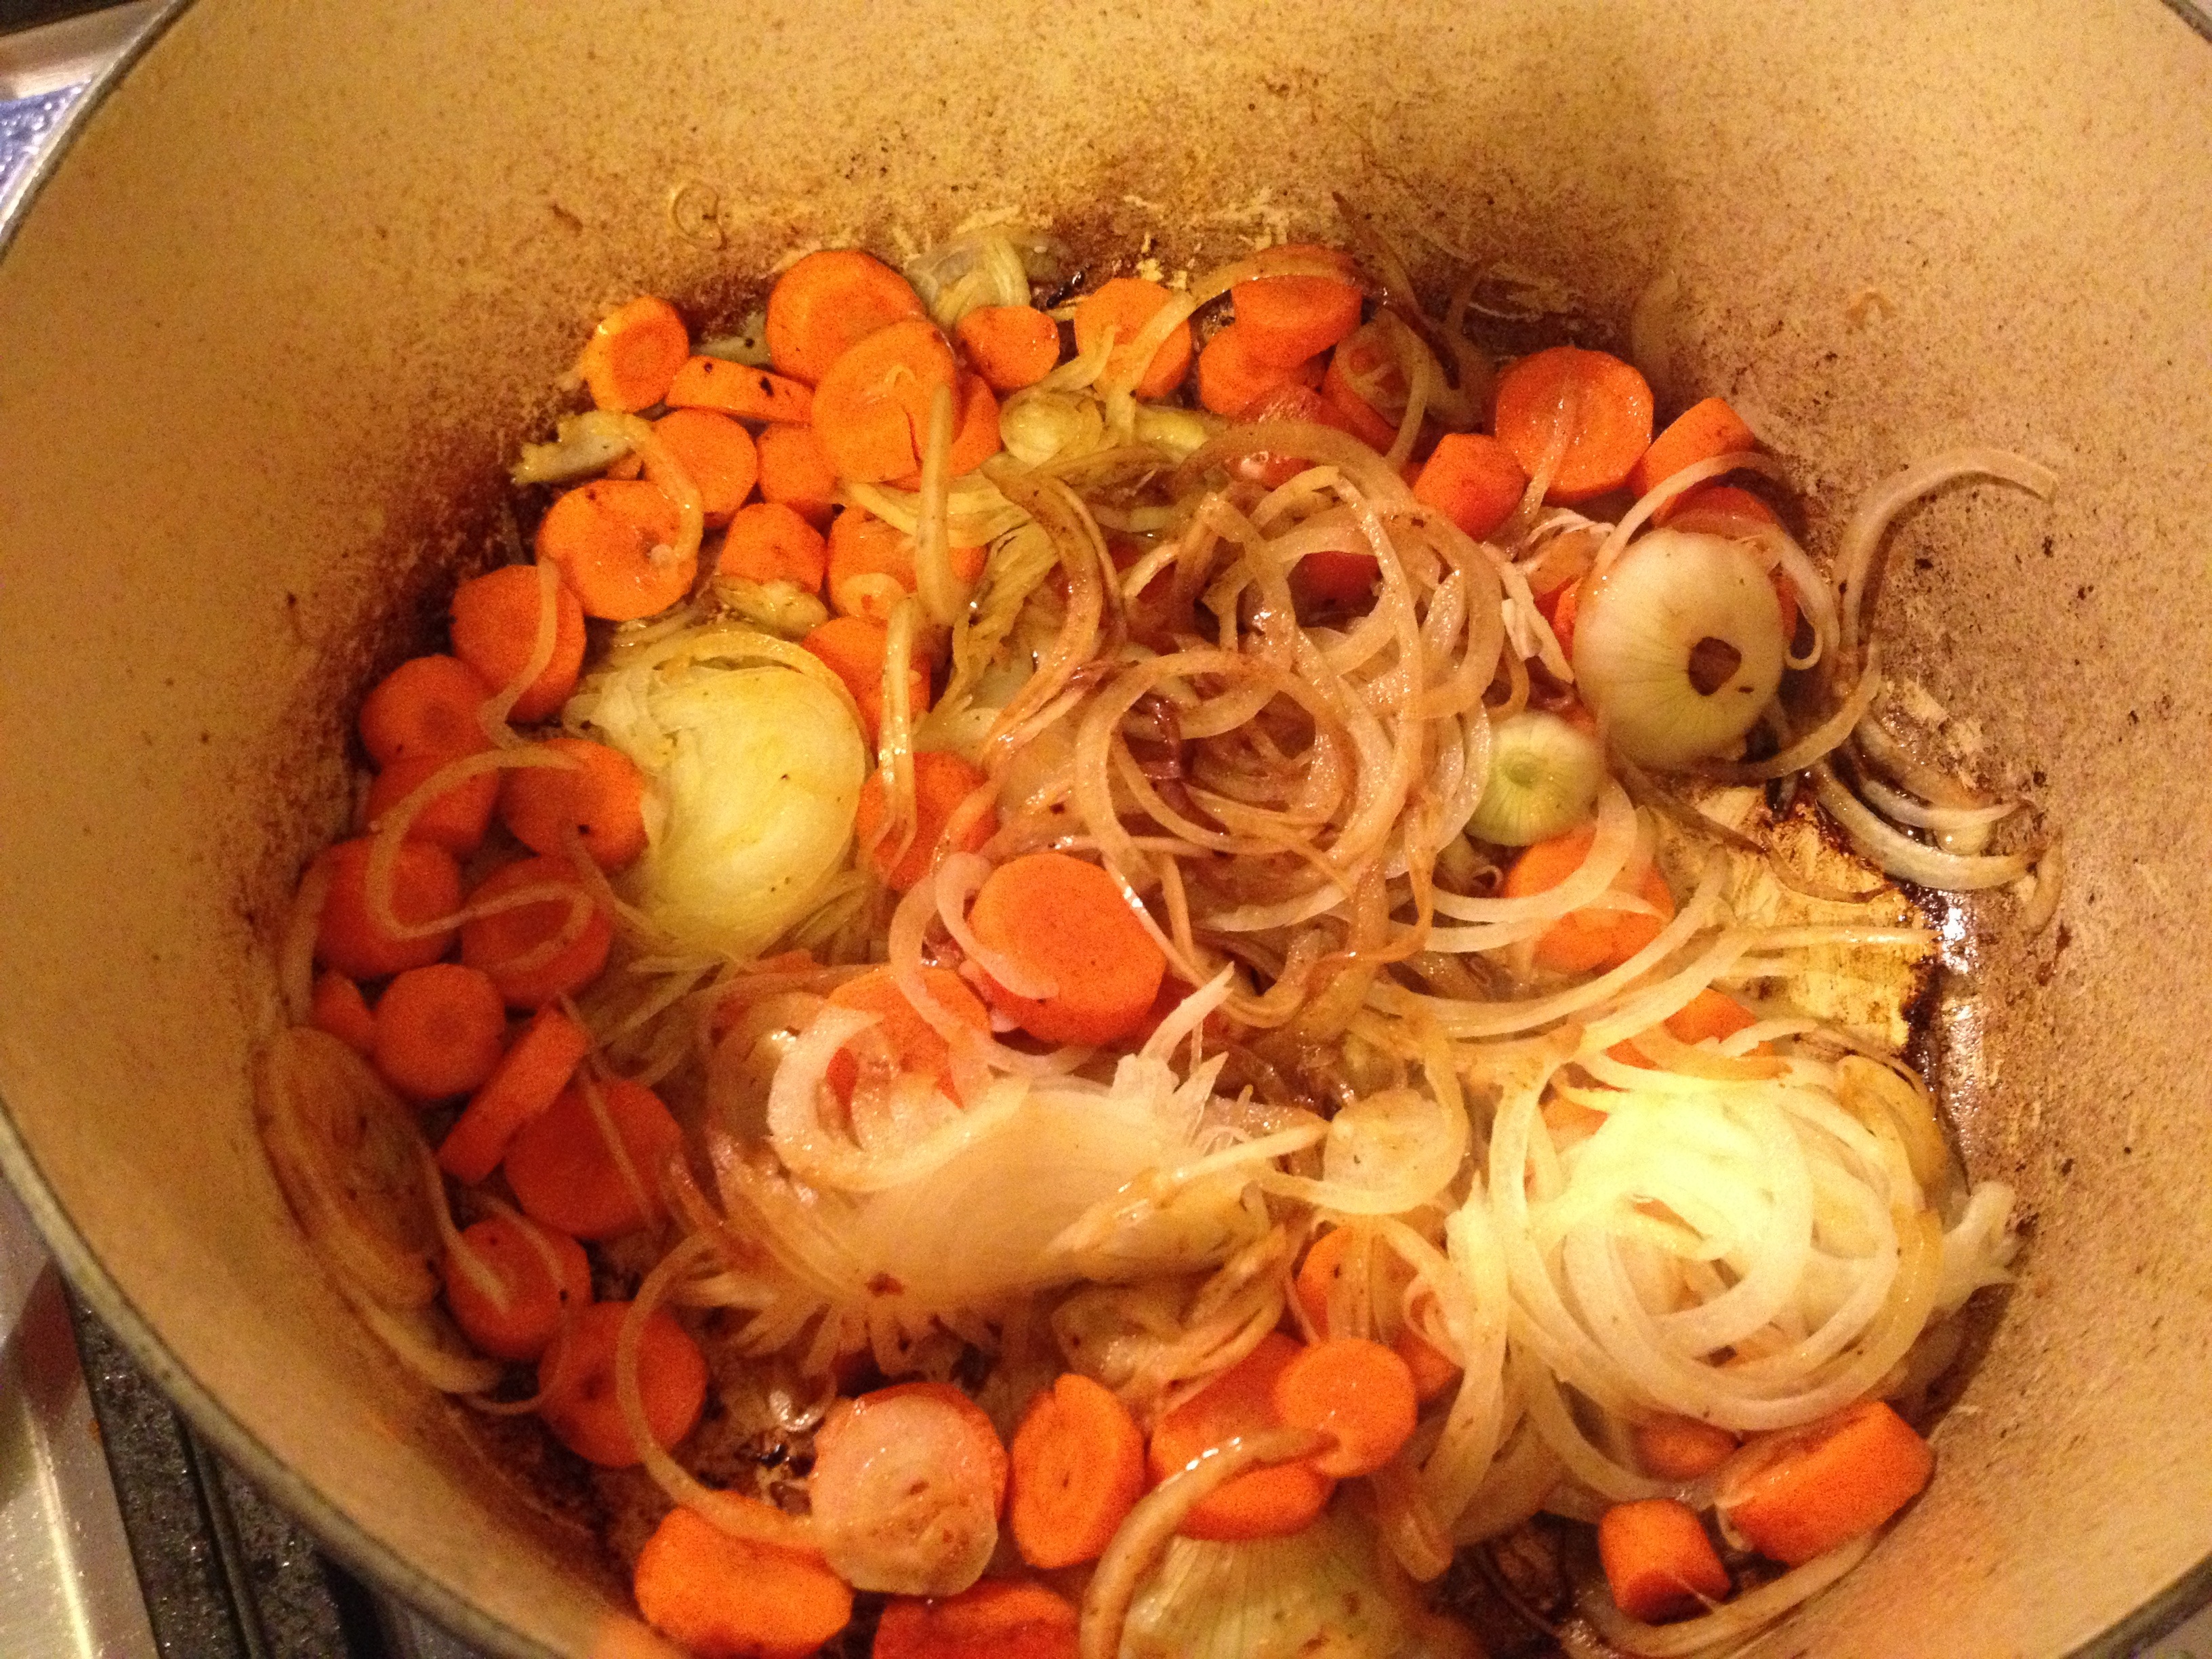 Browning carrots and onions for beef stew.